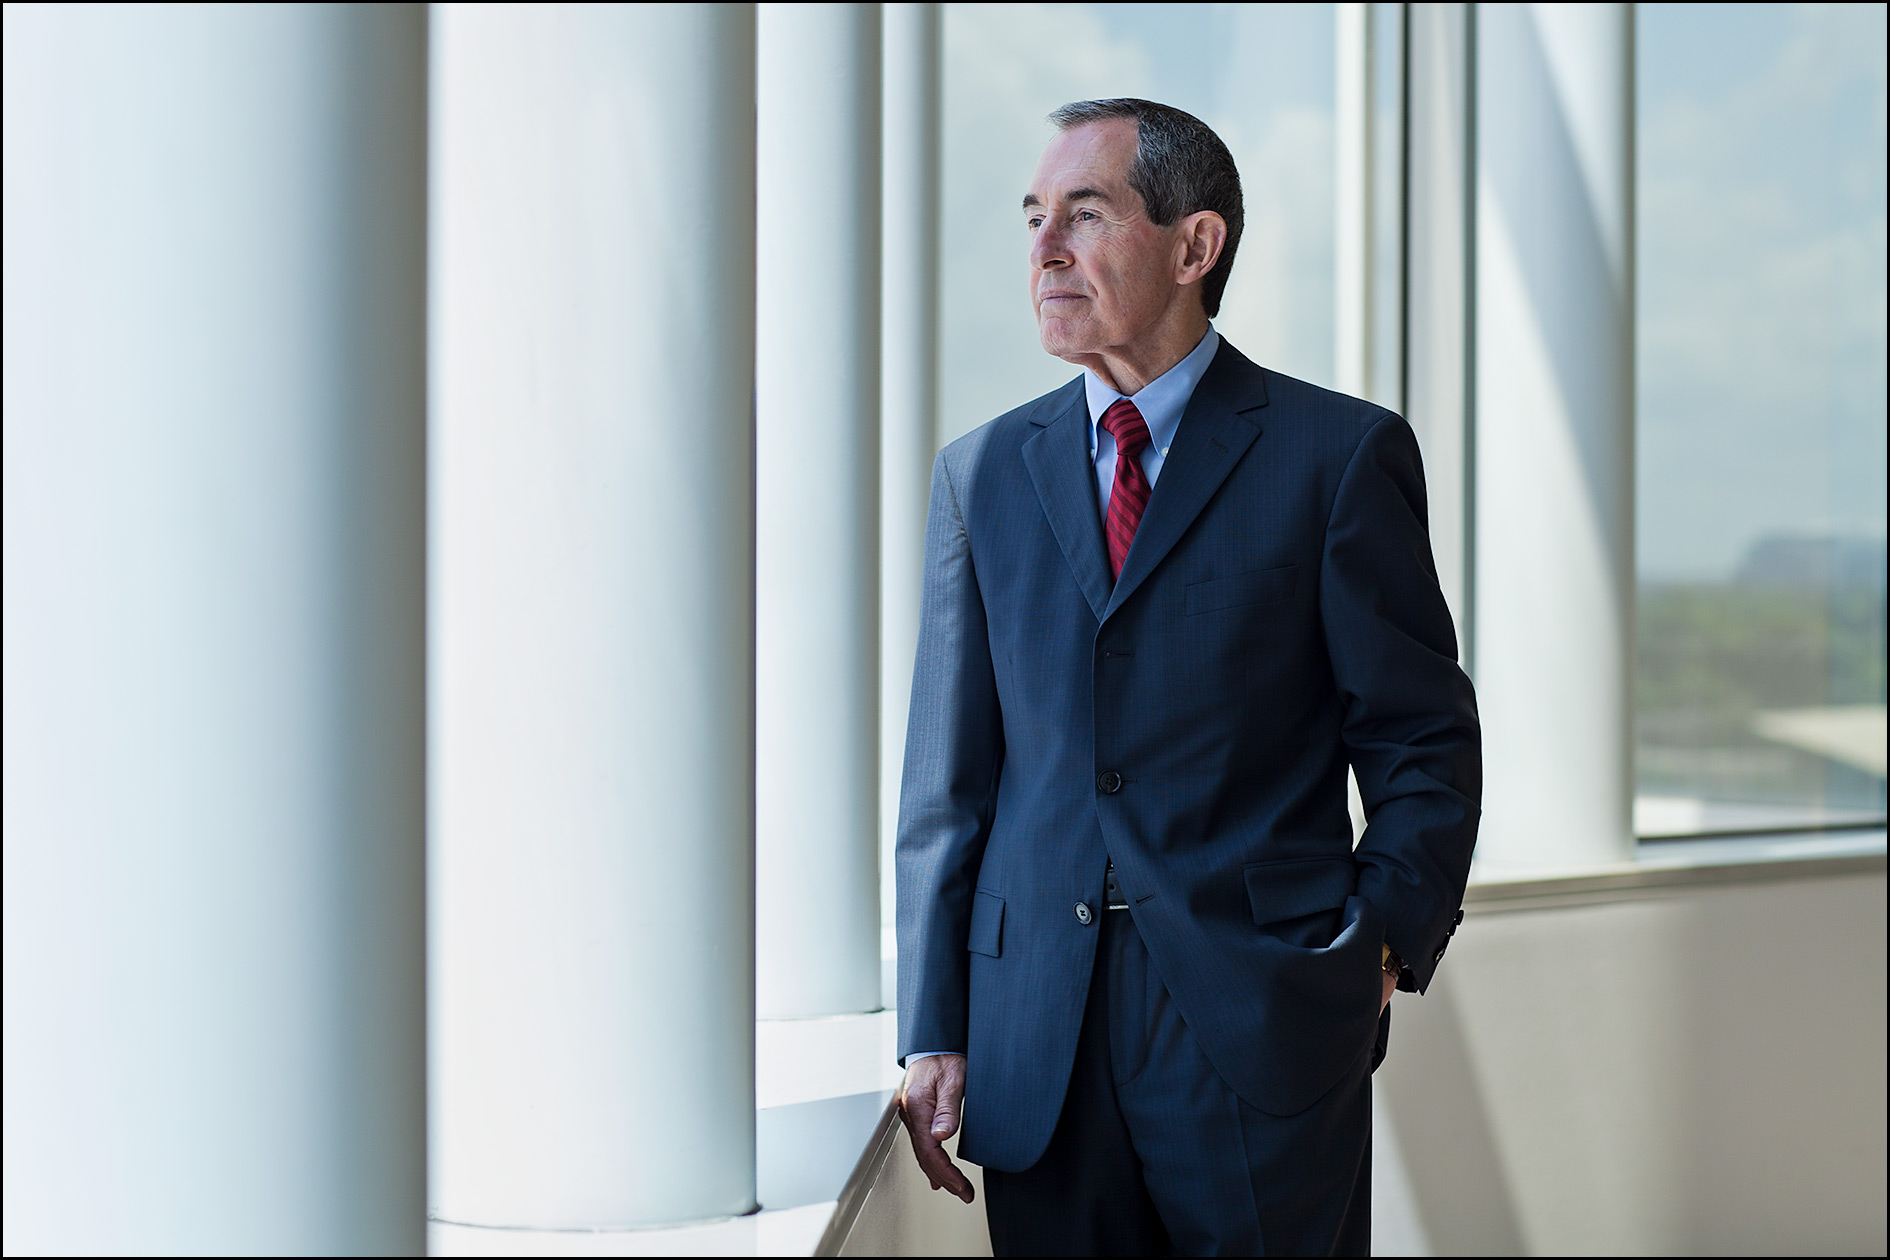 Senior executive at an investment firm stands beside large windows with sunlight streaming in.